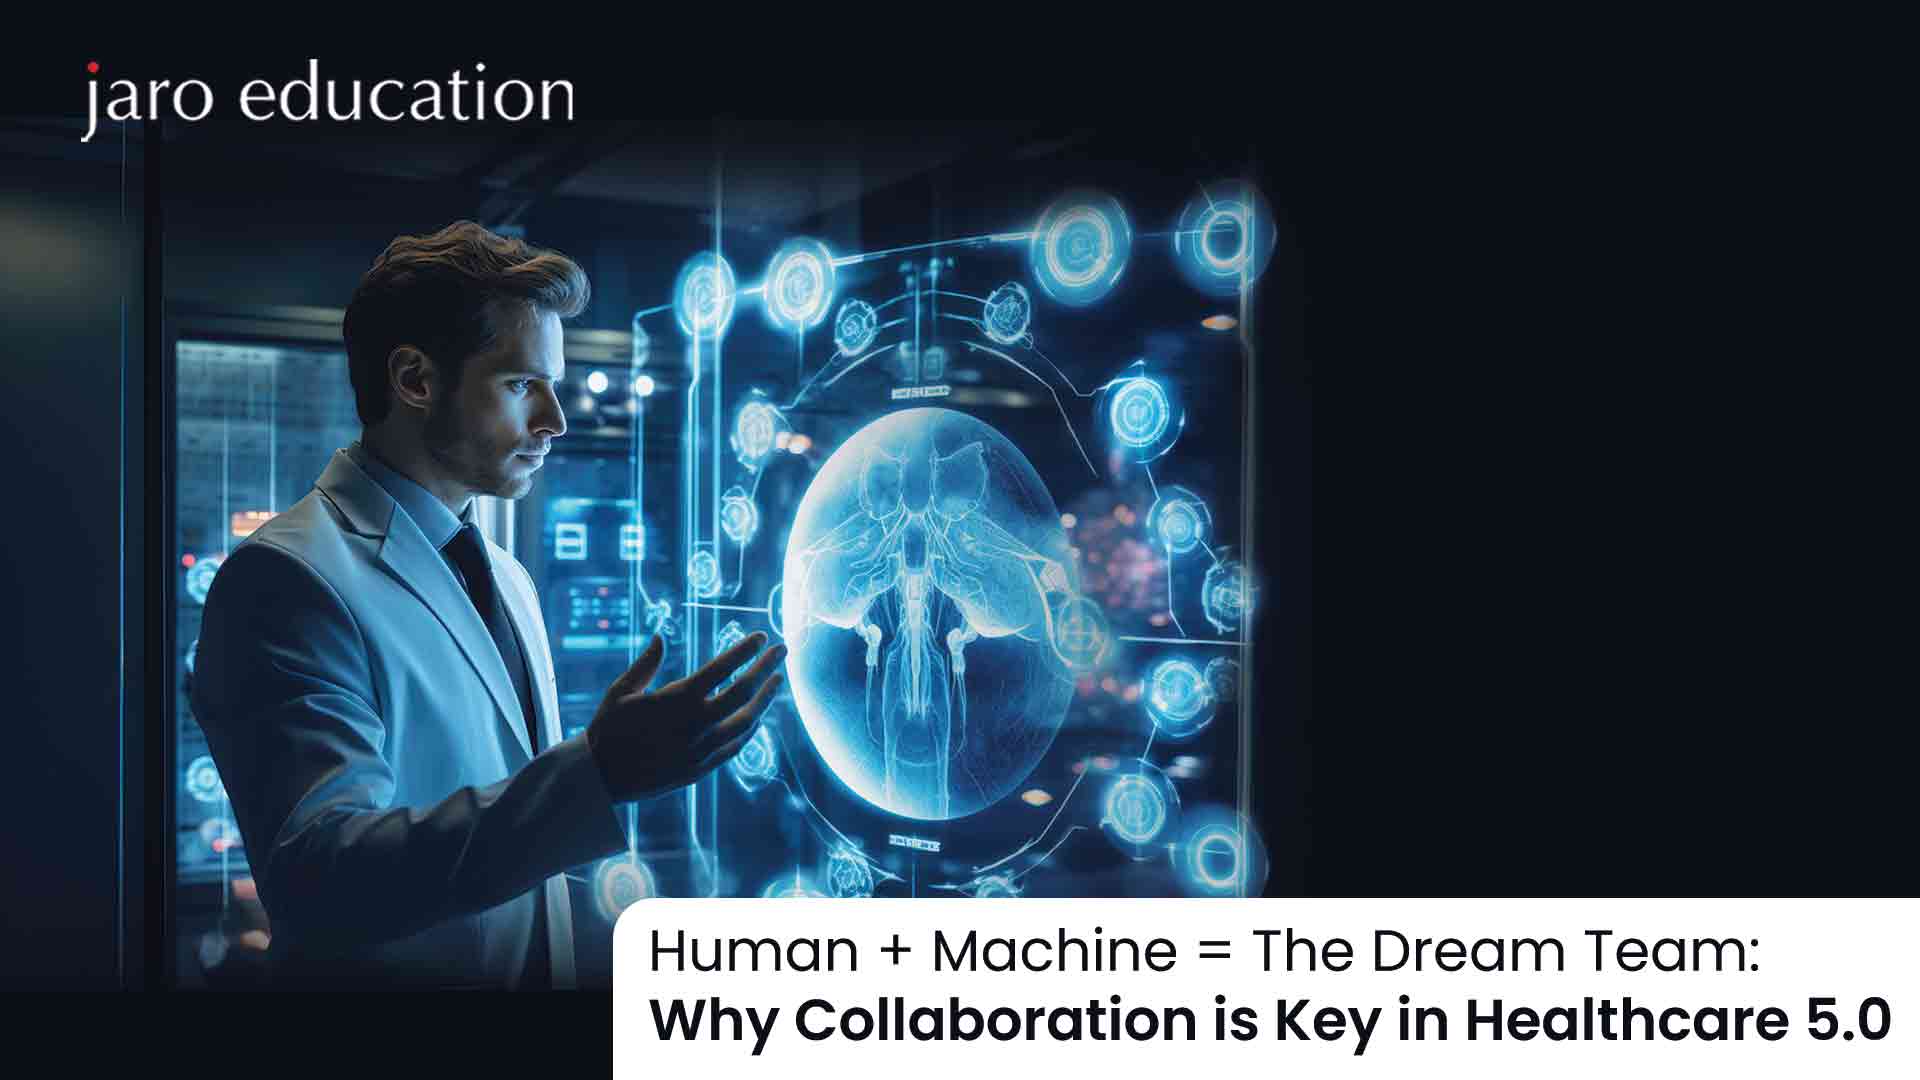 Human-Machine-The-Dream-Team-Why-Collaboration-is-Key-in-Healthcare-5-0